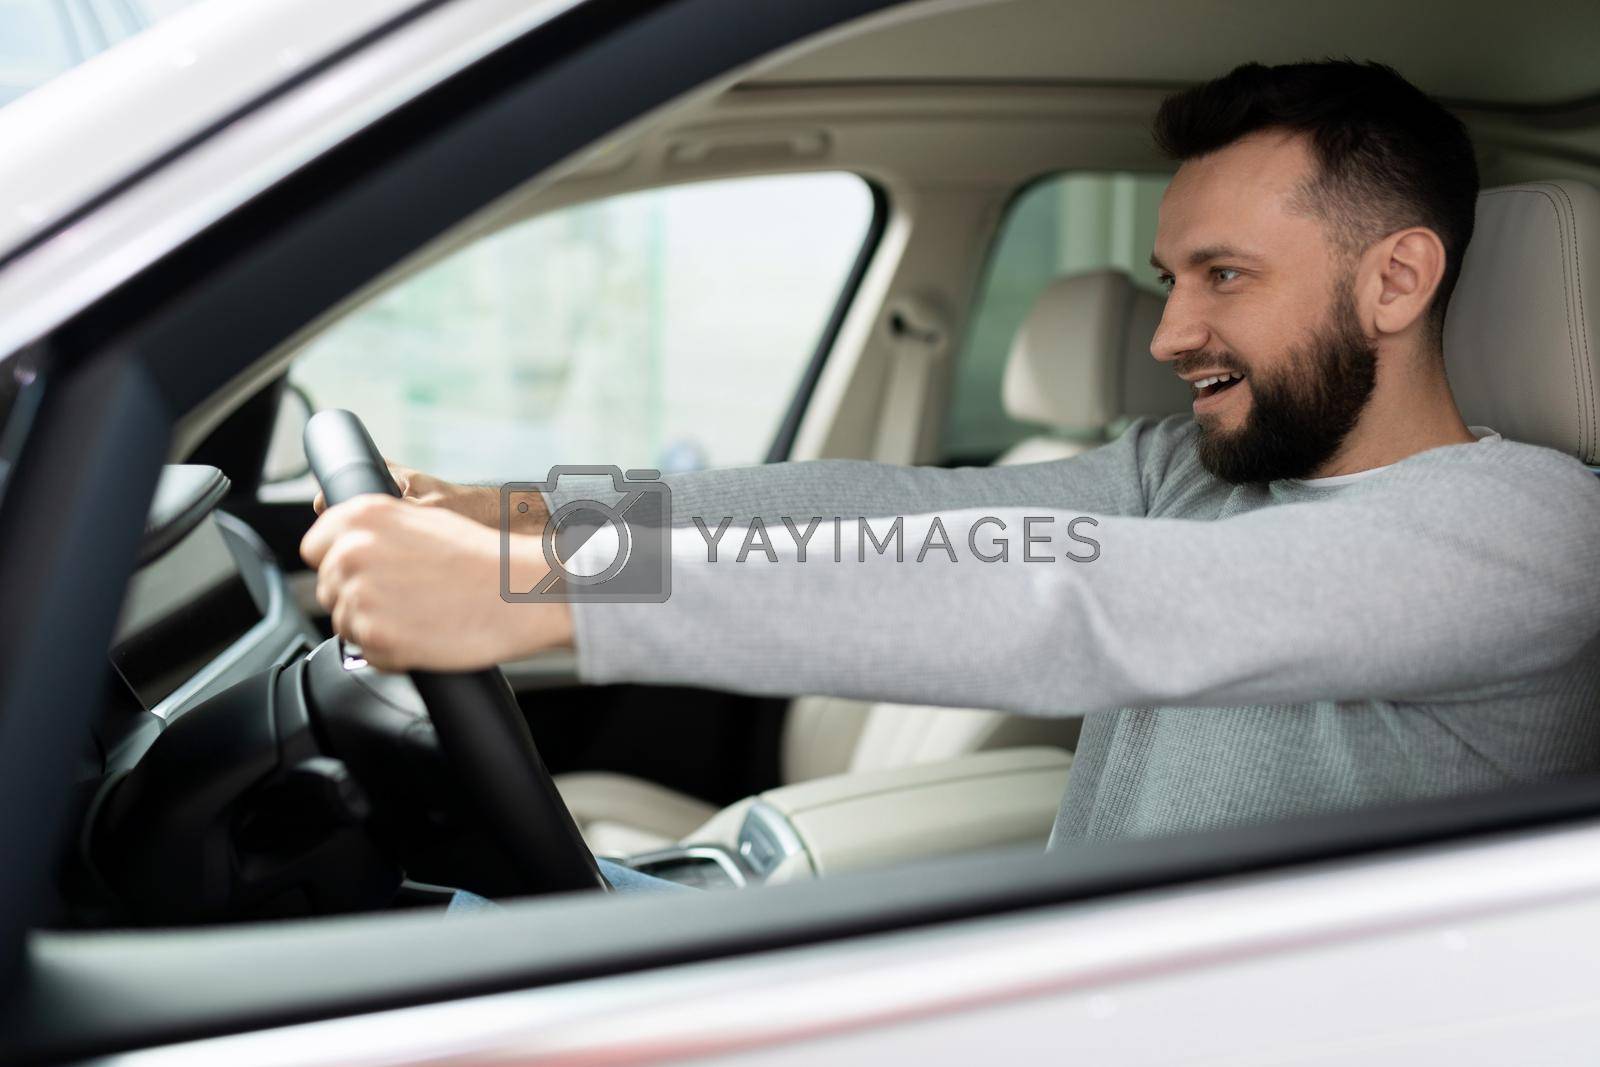 Royalty free image of novice driver behind the wheel of a new car looks ahead with a smile by TRMK